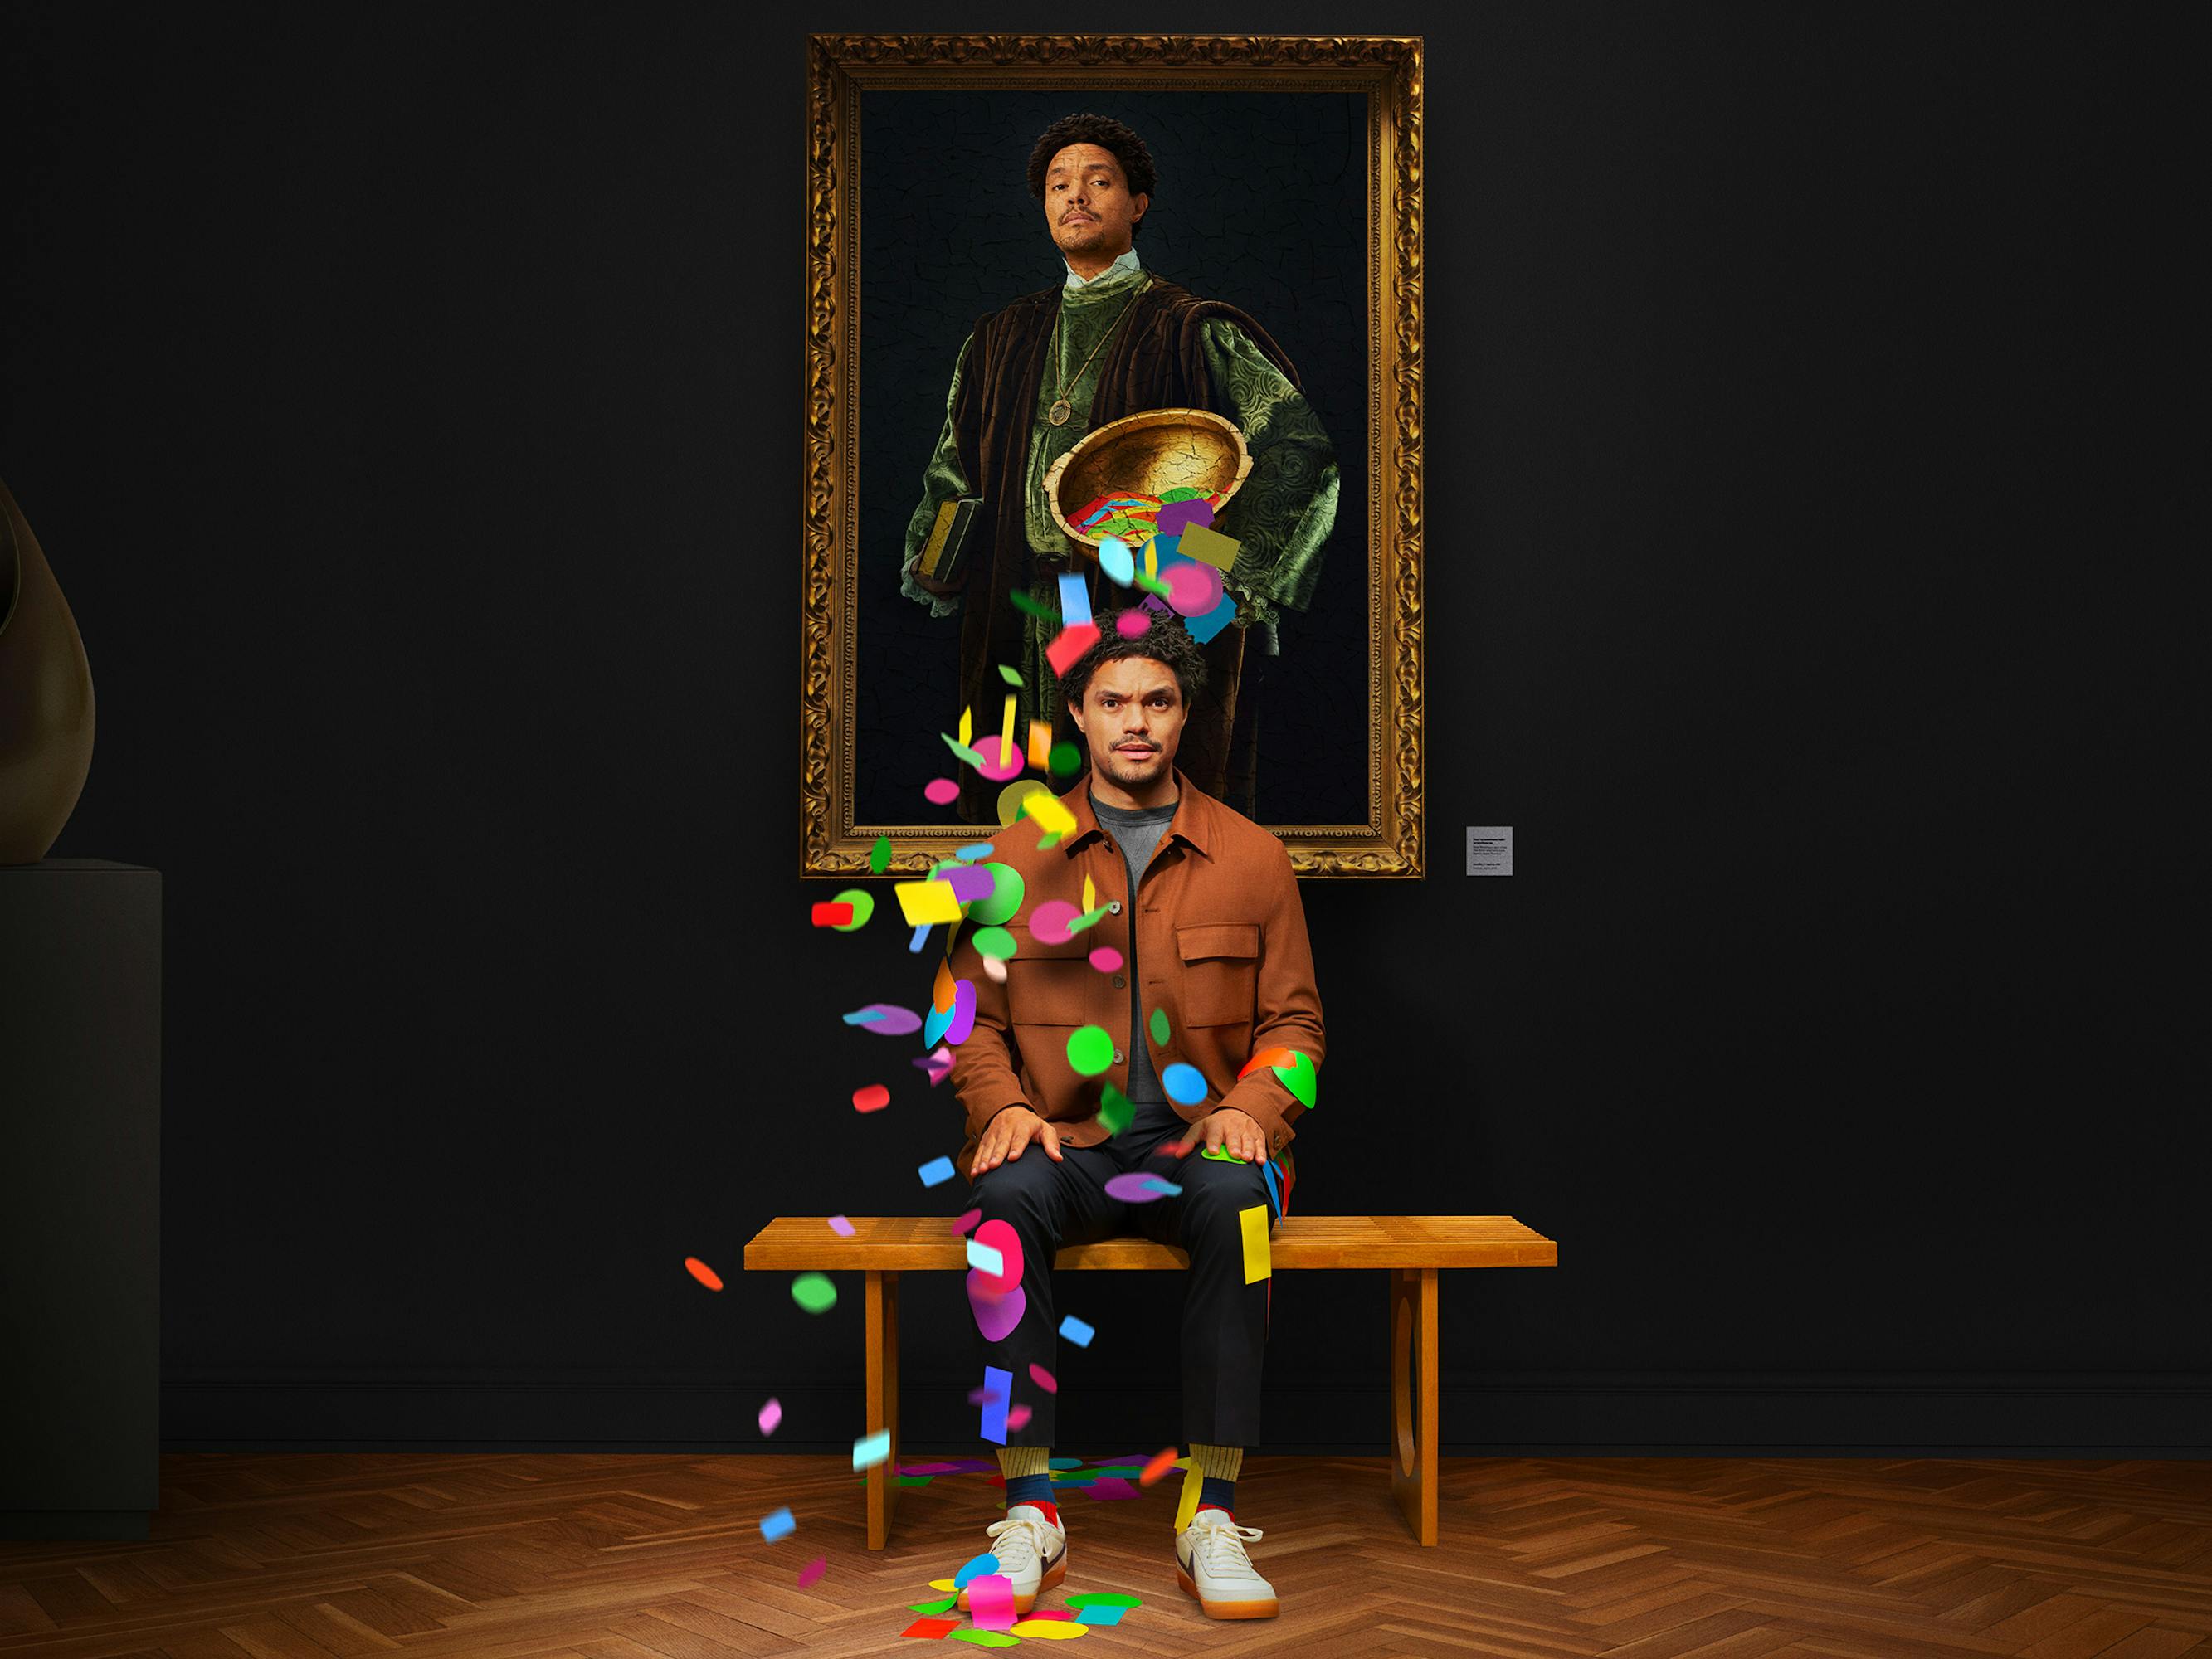 Trevor Noah wears a brown jacket and sits in front of a portrait of himself, as a bucket of stickers falls over his head.